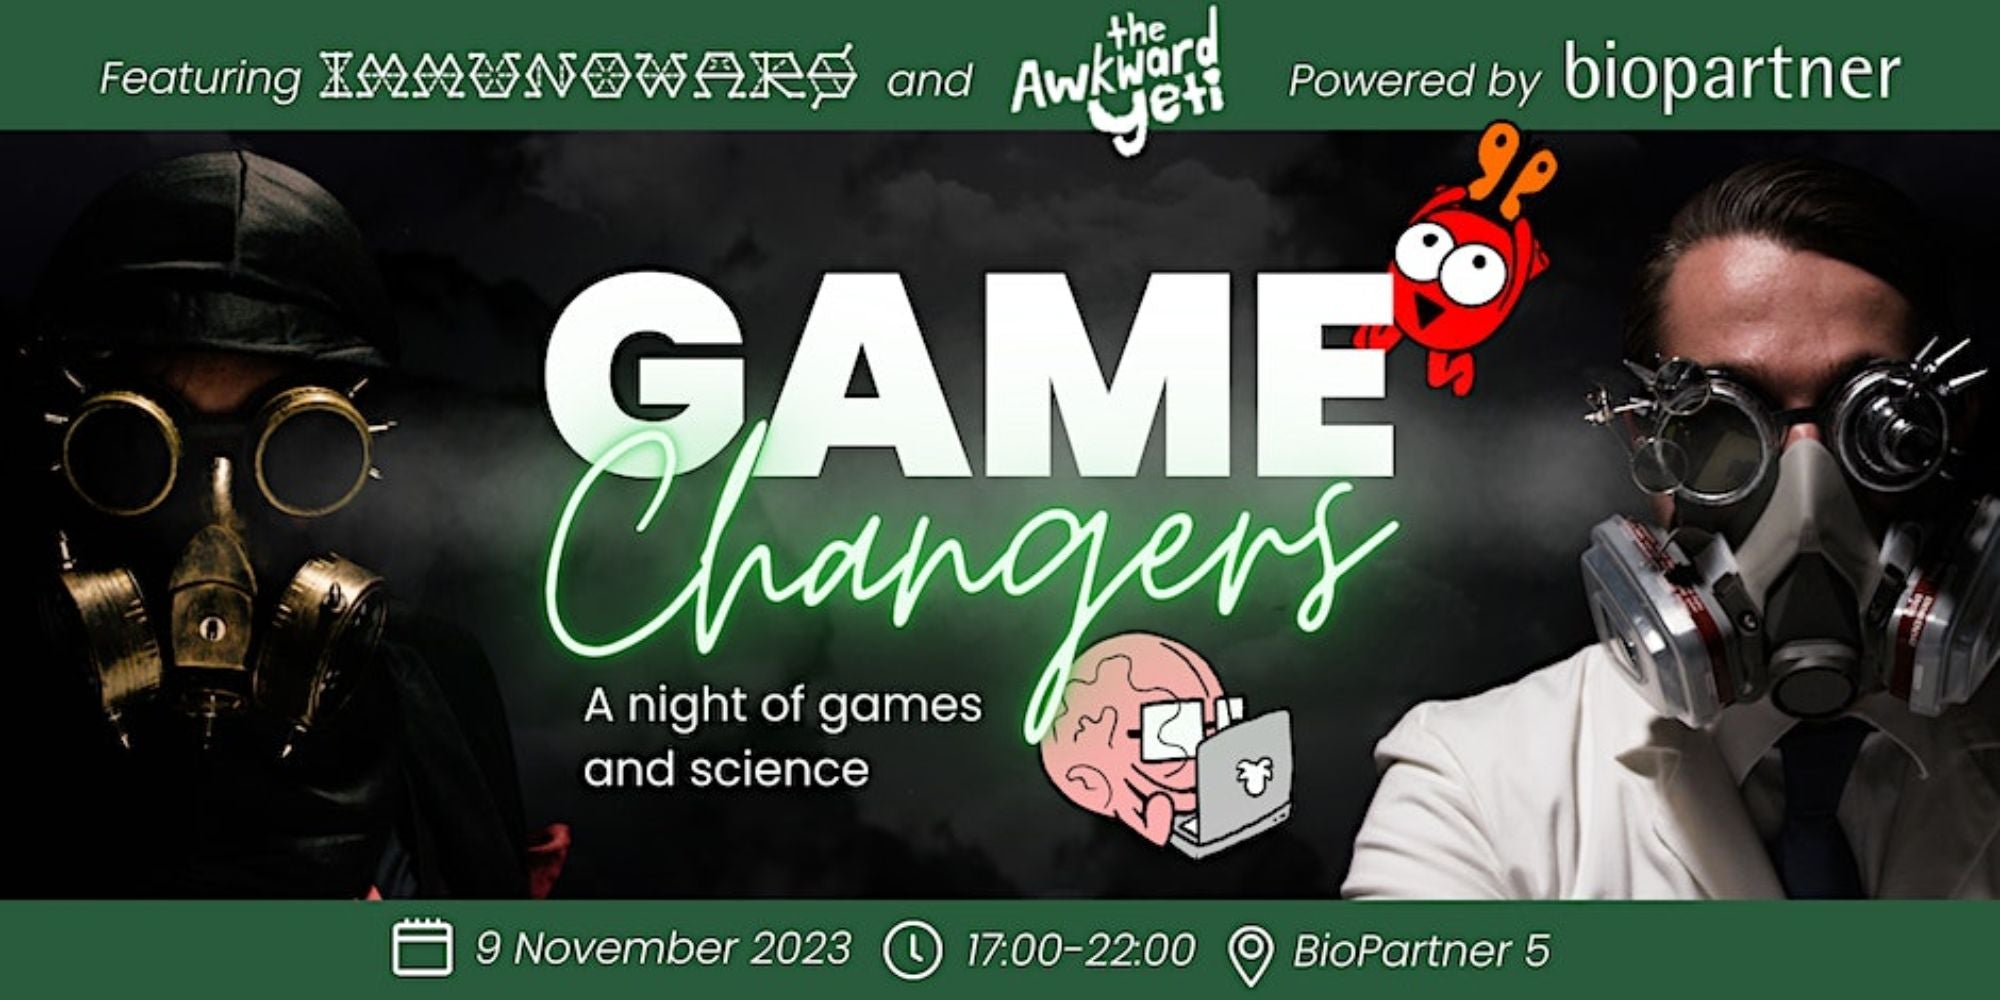 Game Changers event 2023 